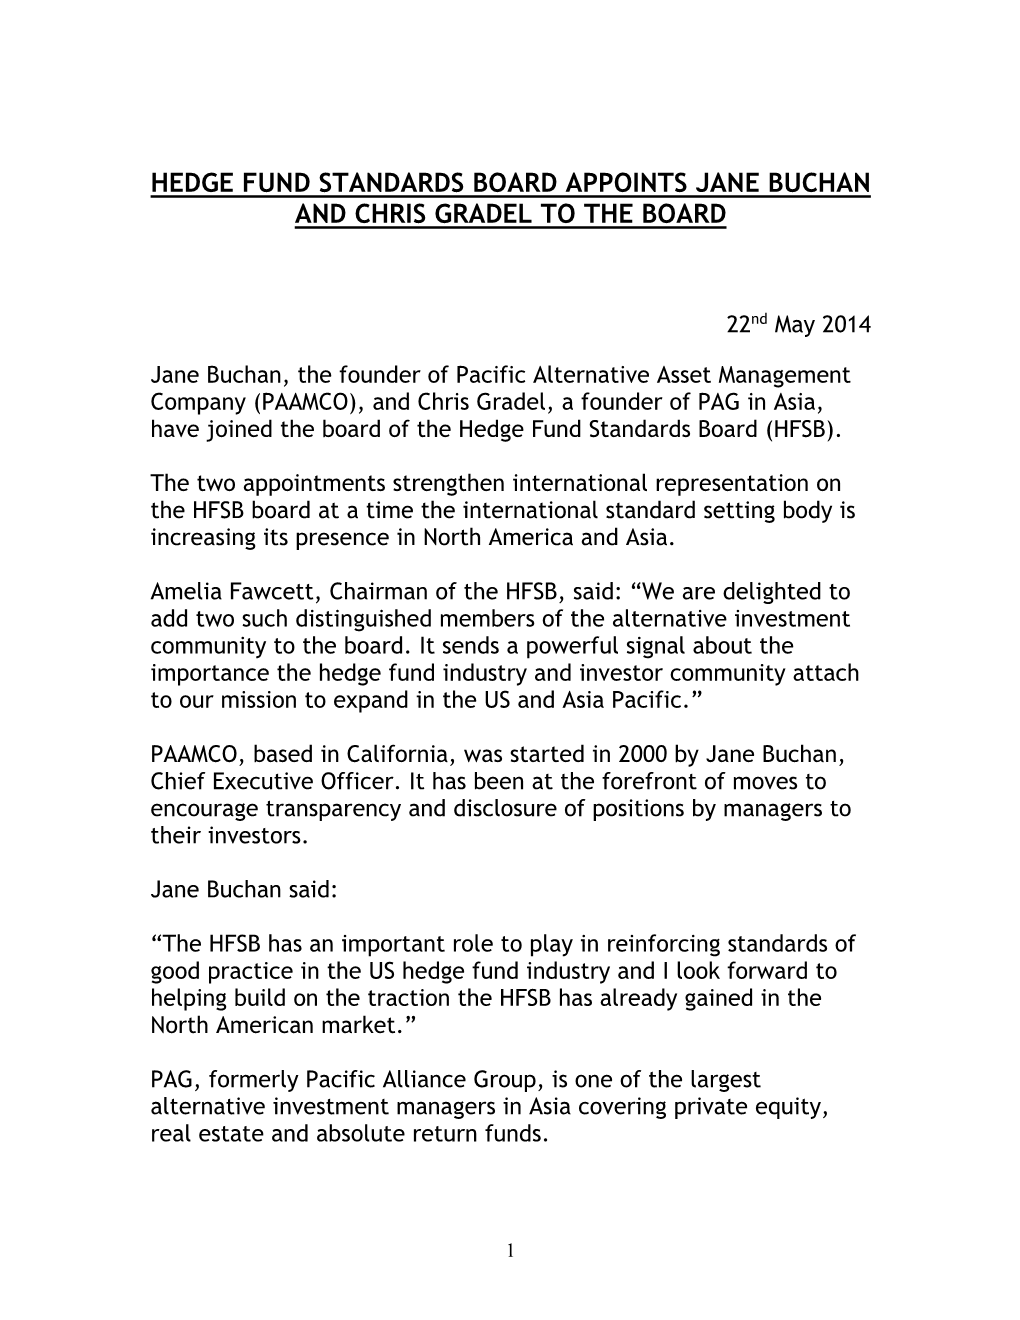 HFSB Appoints Jane Buchan and Chris Gradel to the Board